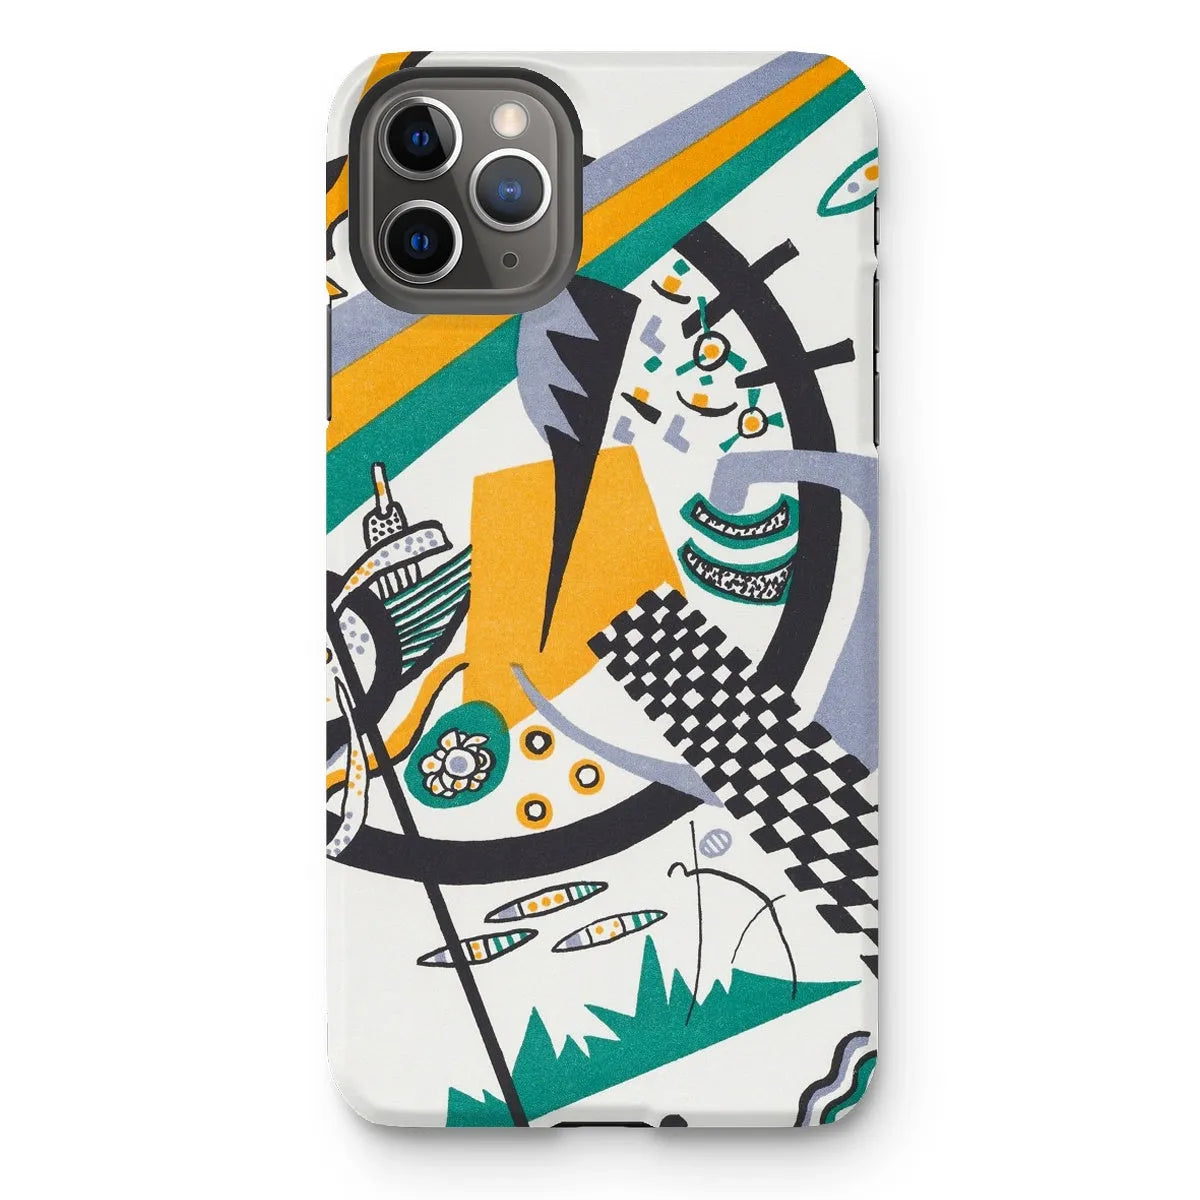 Small Worlds Iv - Expressionist Phone Case - Wassily Kandinsky - Iphone 11 Pro Max / Matte - Mobile Phone Cases